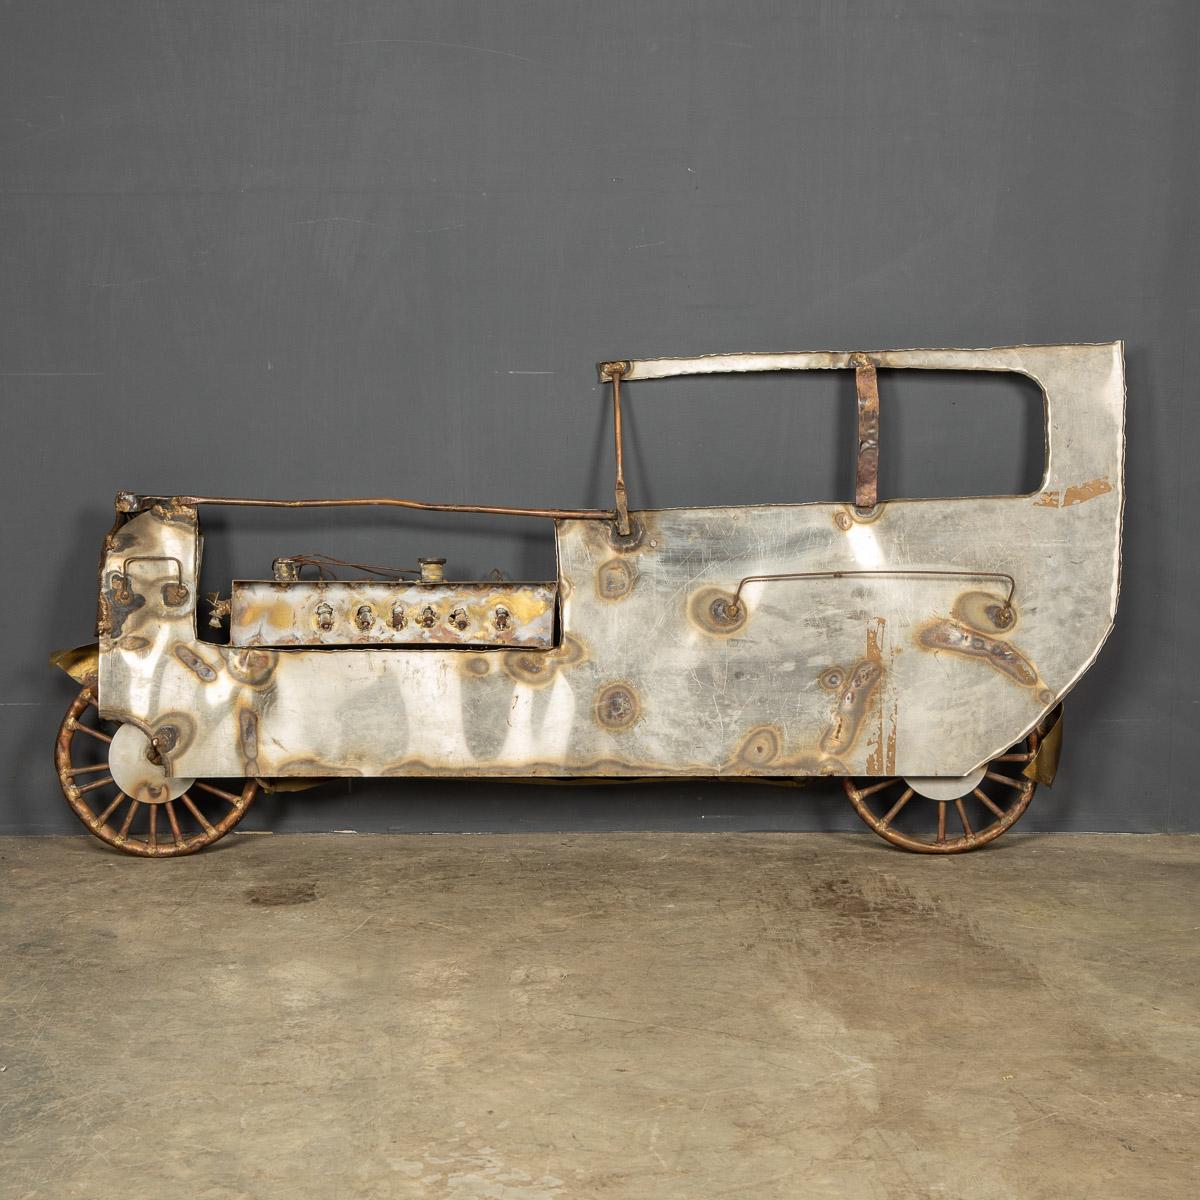 This classic car is handmade in Italy from brass, copper and steel, created in the mid 20th century as a piece of decorative fun and novelty.

CONDITION
In Good Condition - wear consistent with age.

SIZE
Width: 148cm
Depth: 8cm
Height: 68cm.